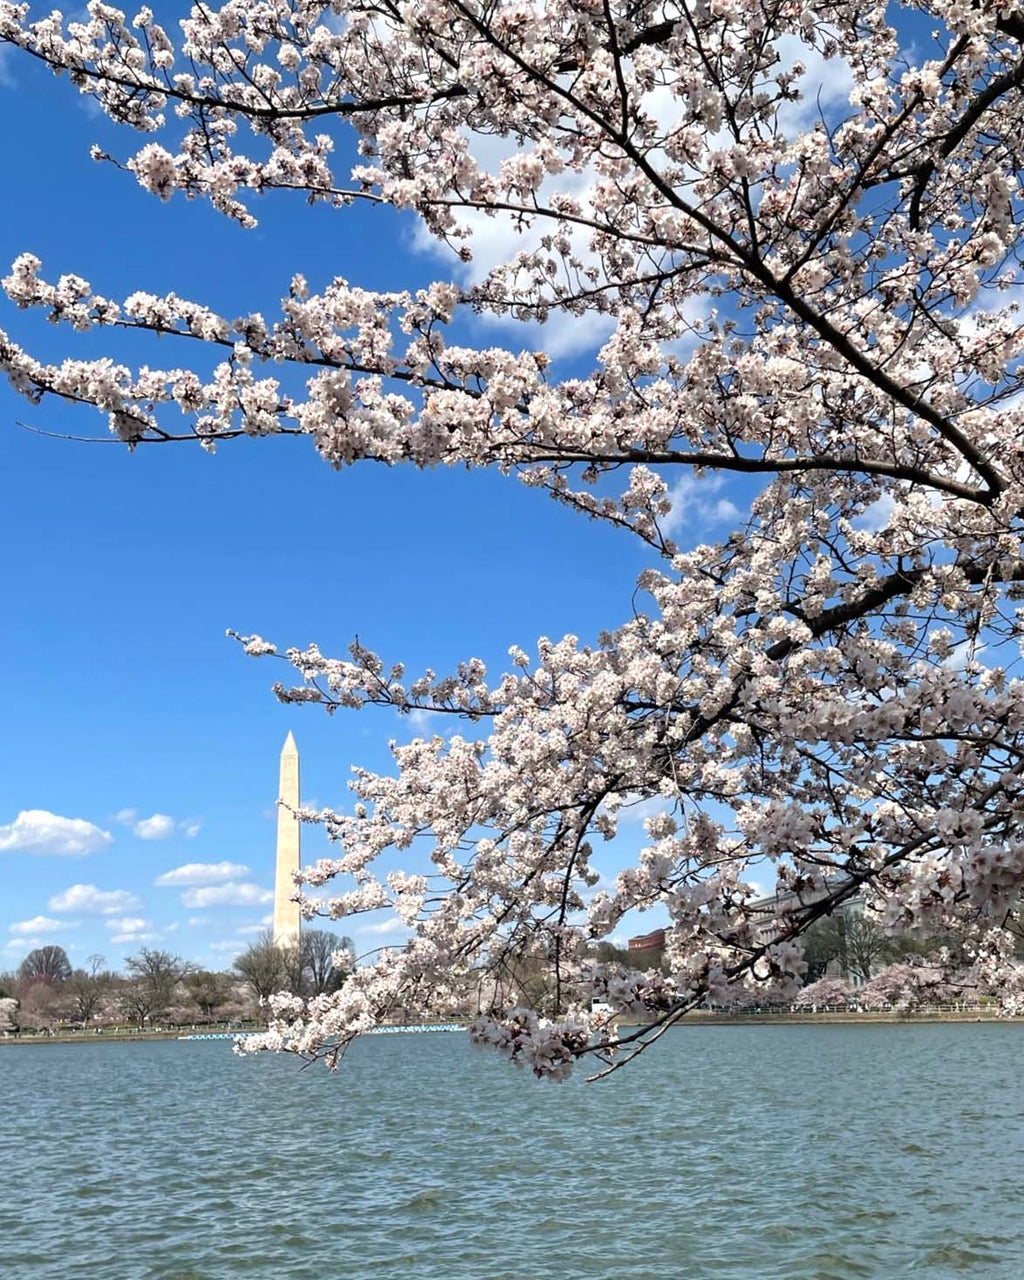 National Cherry Blossom Festival 2022 returns to in-person events